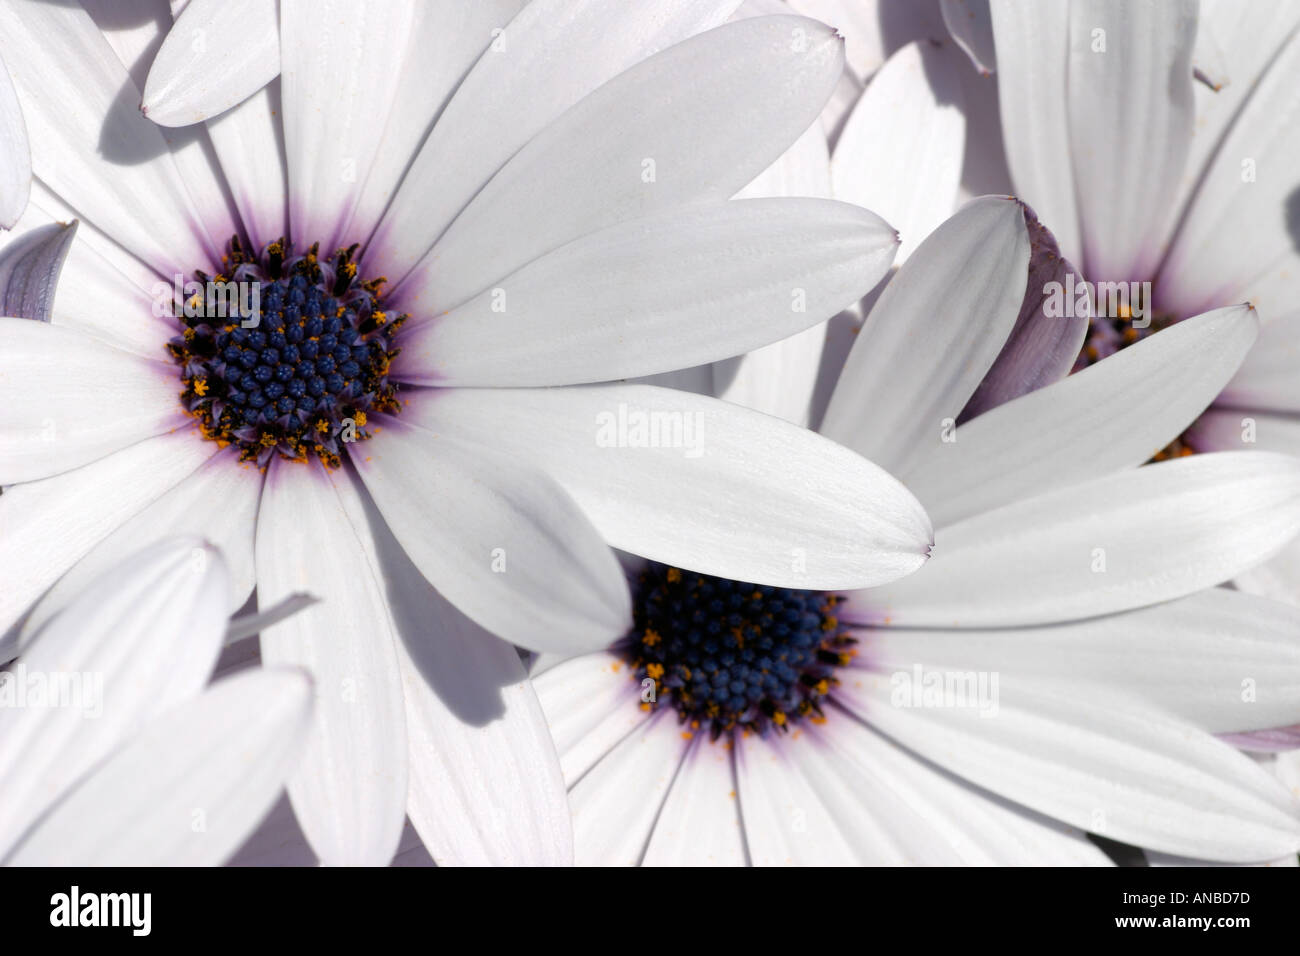 Glowing, bright faces of the daisy like Osteospermum flowers, opening in brilliant sunshine. Stock Photo